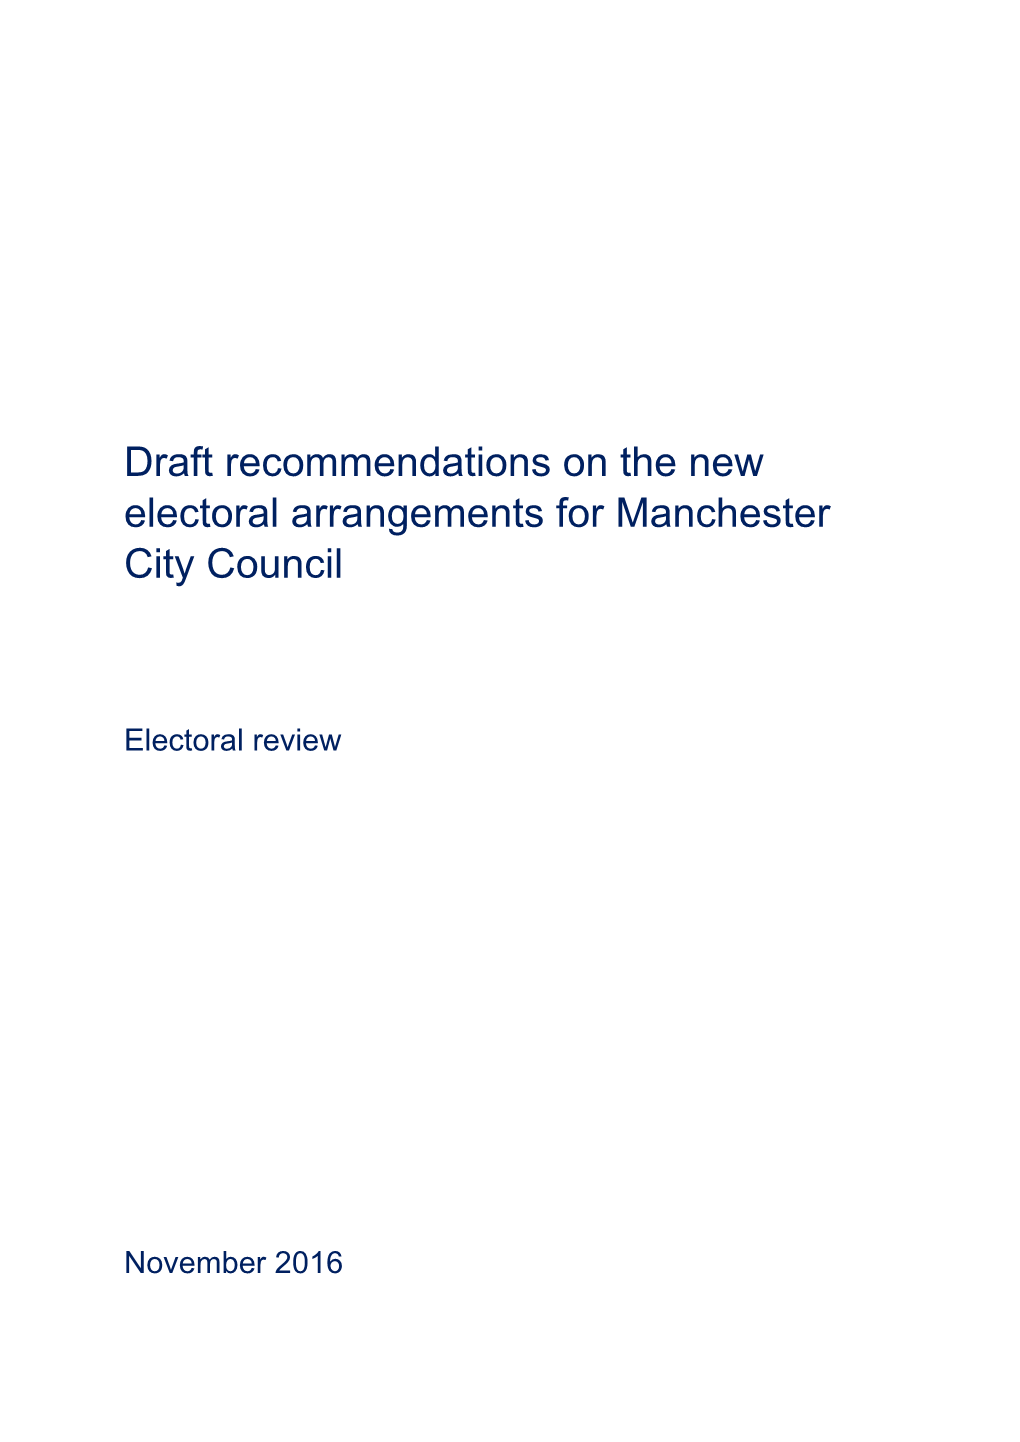 Draft Recommendations for Manchester City Council